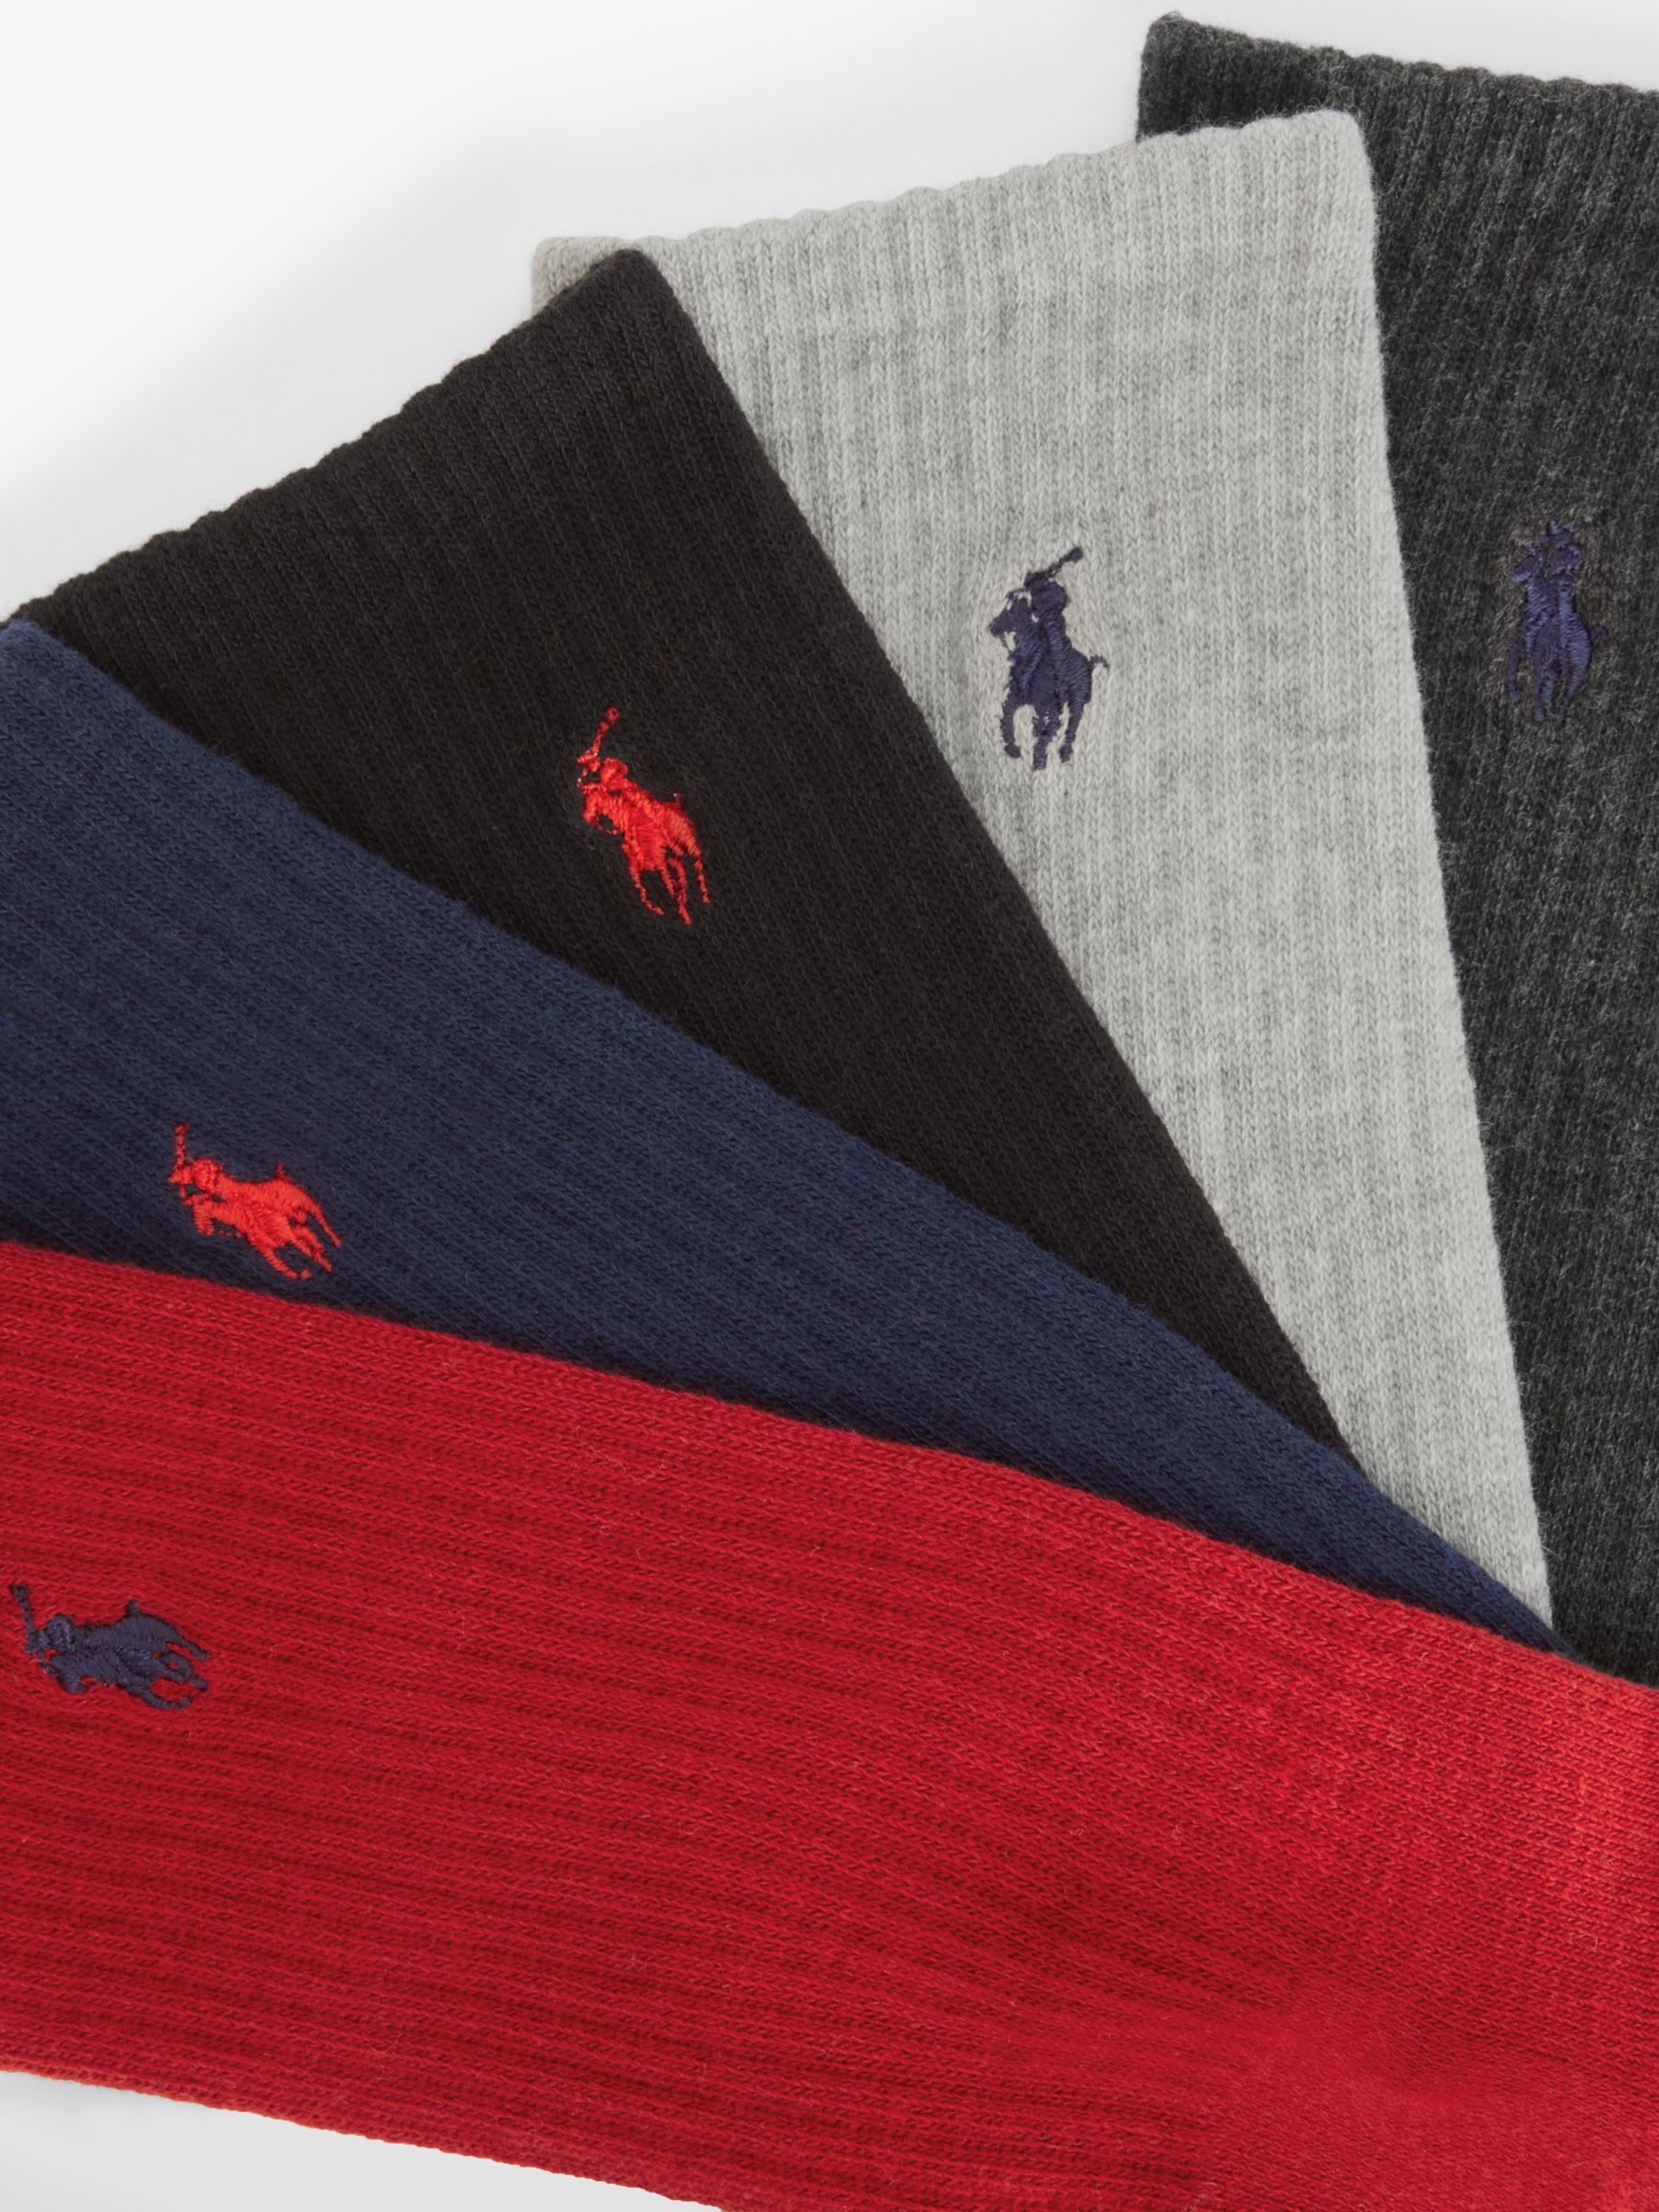 Buy Polo Ralph Lauren Cotton Blend Crew Socks, One Size, Pack of 6, Multi Online at johnlewis.com